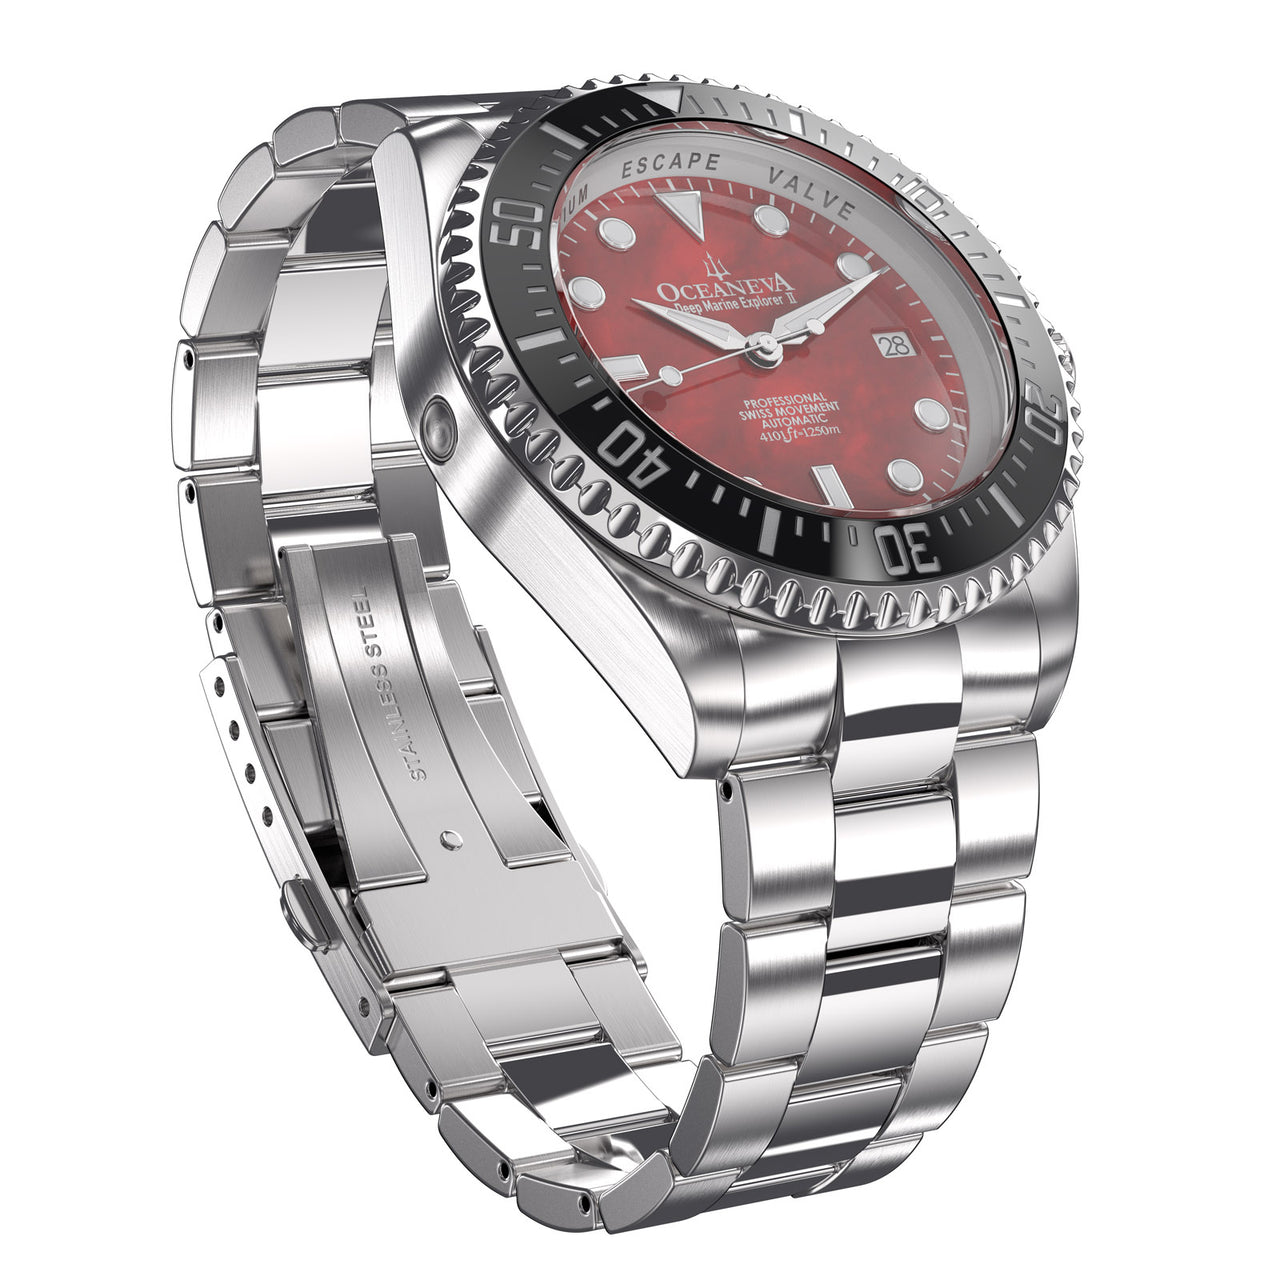 Oceaneva 1250M Dive Watch Red Mother of Pearl Front Picture Slight Right Slant View